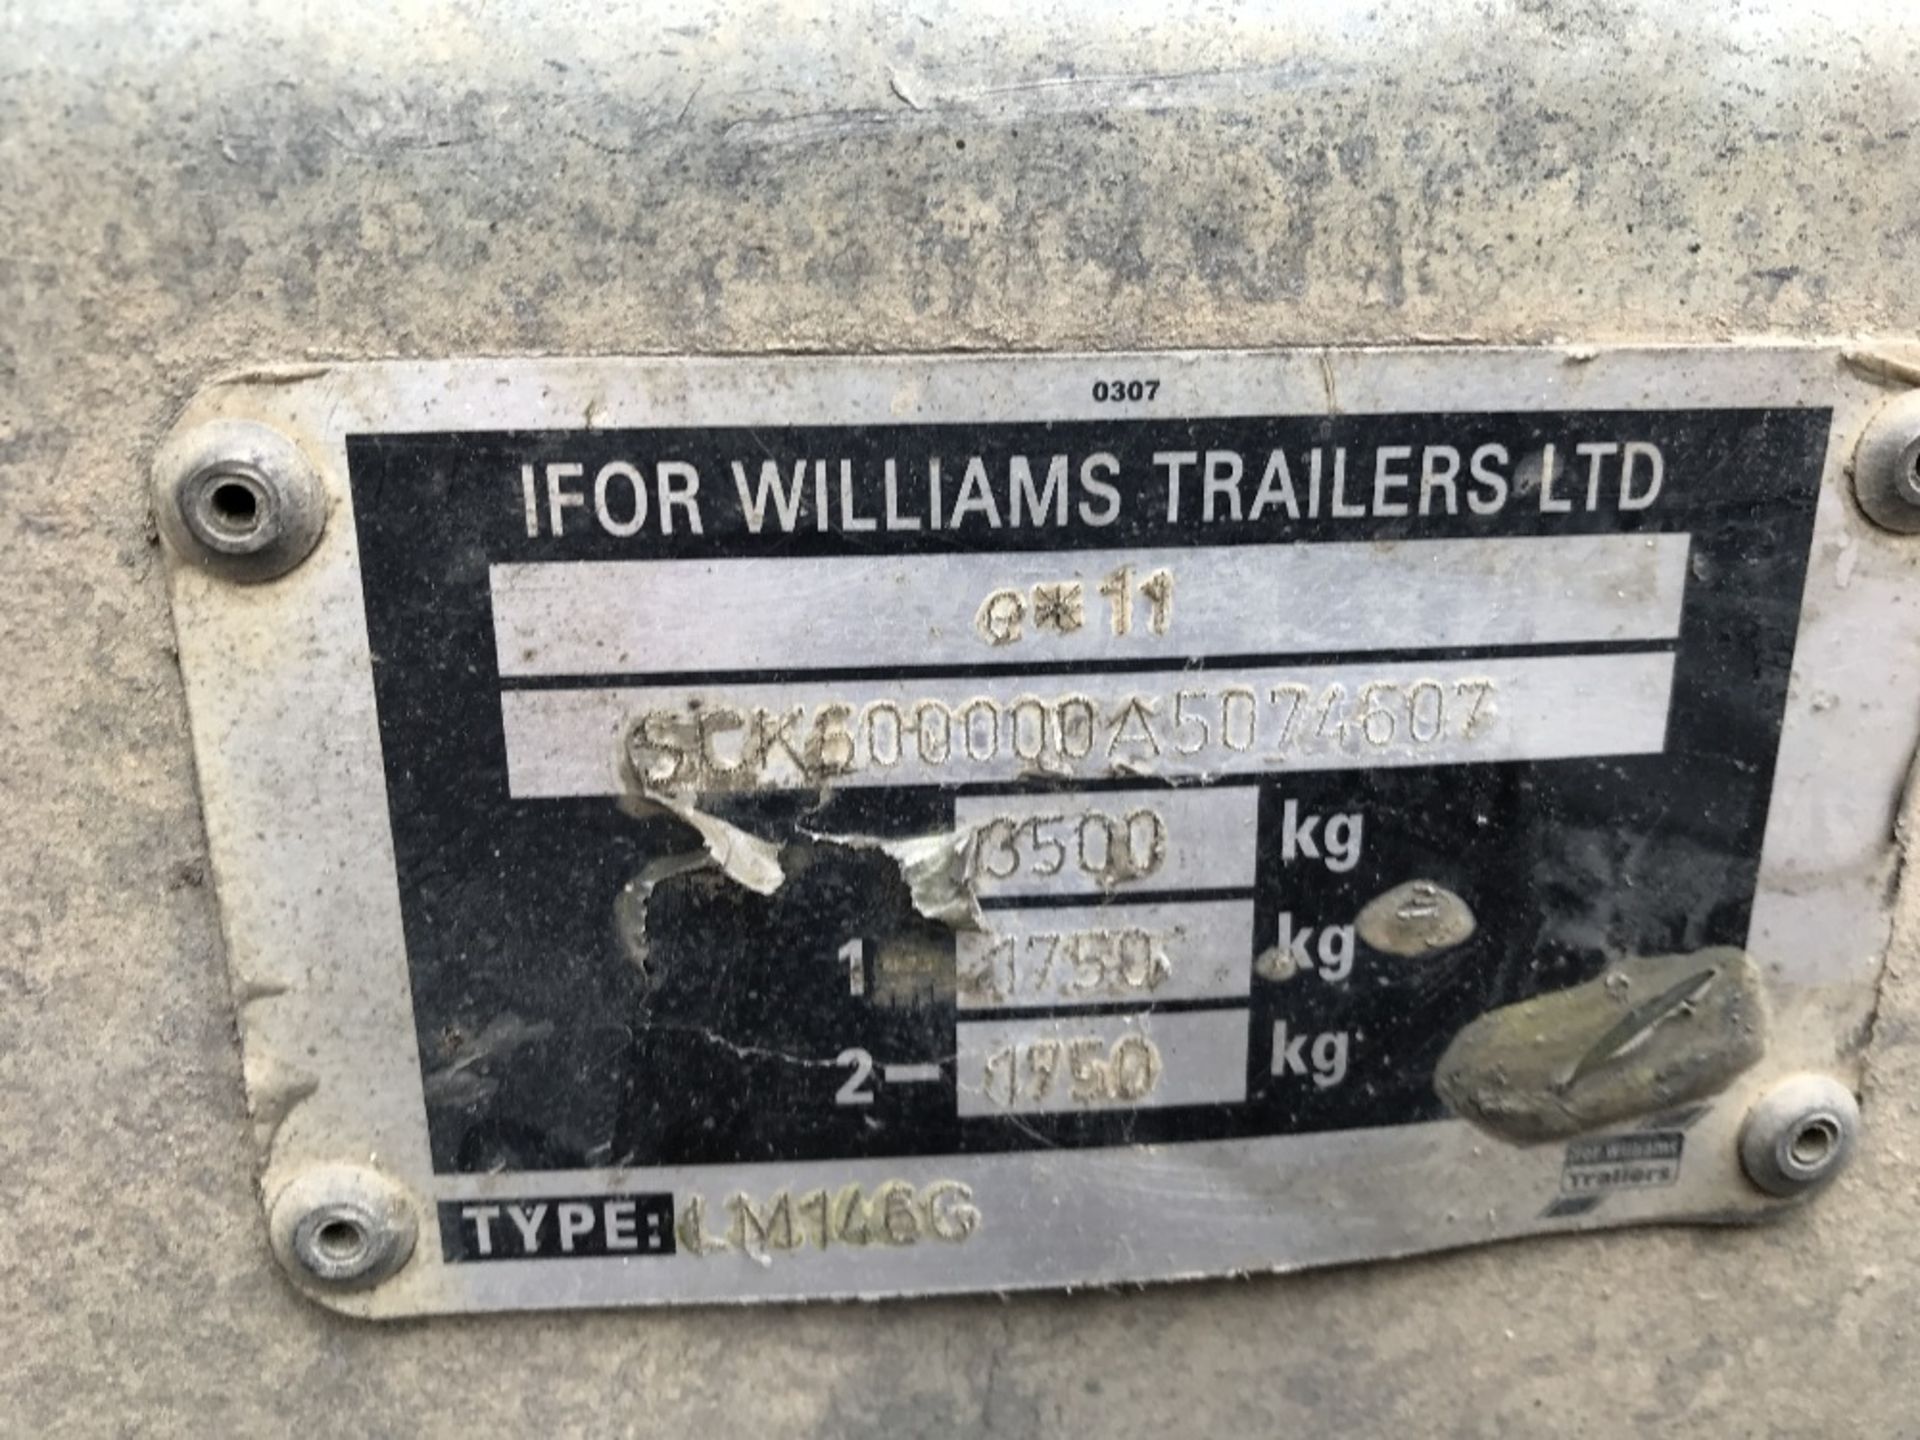 IFOR WILLIAMS LM146G TWIN AXLED DROP SIDE TRAILER SN:SCK600000A5074607 FULL WIDTH RAMP INCLUDES - Image 3 of 6